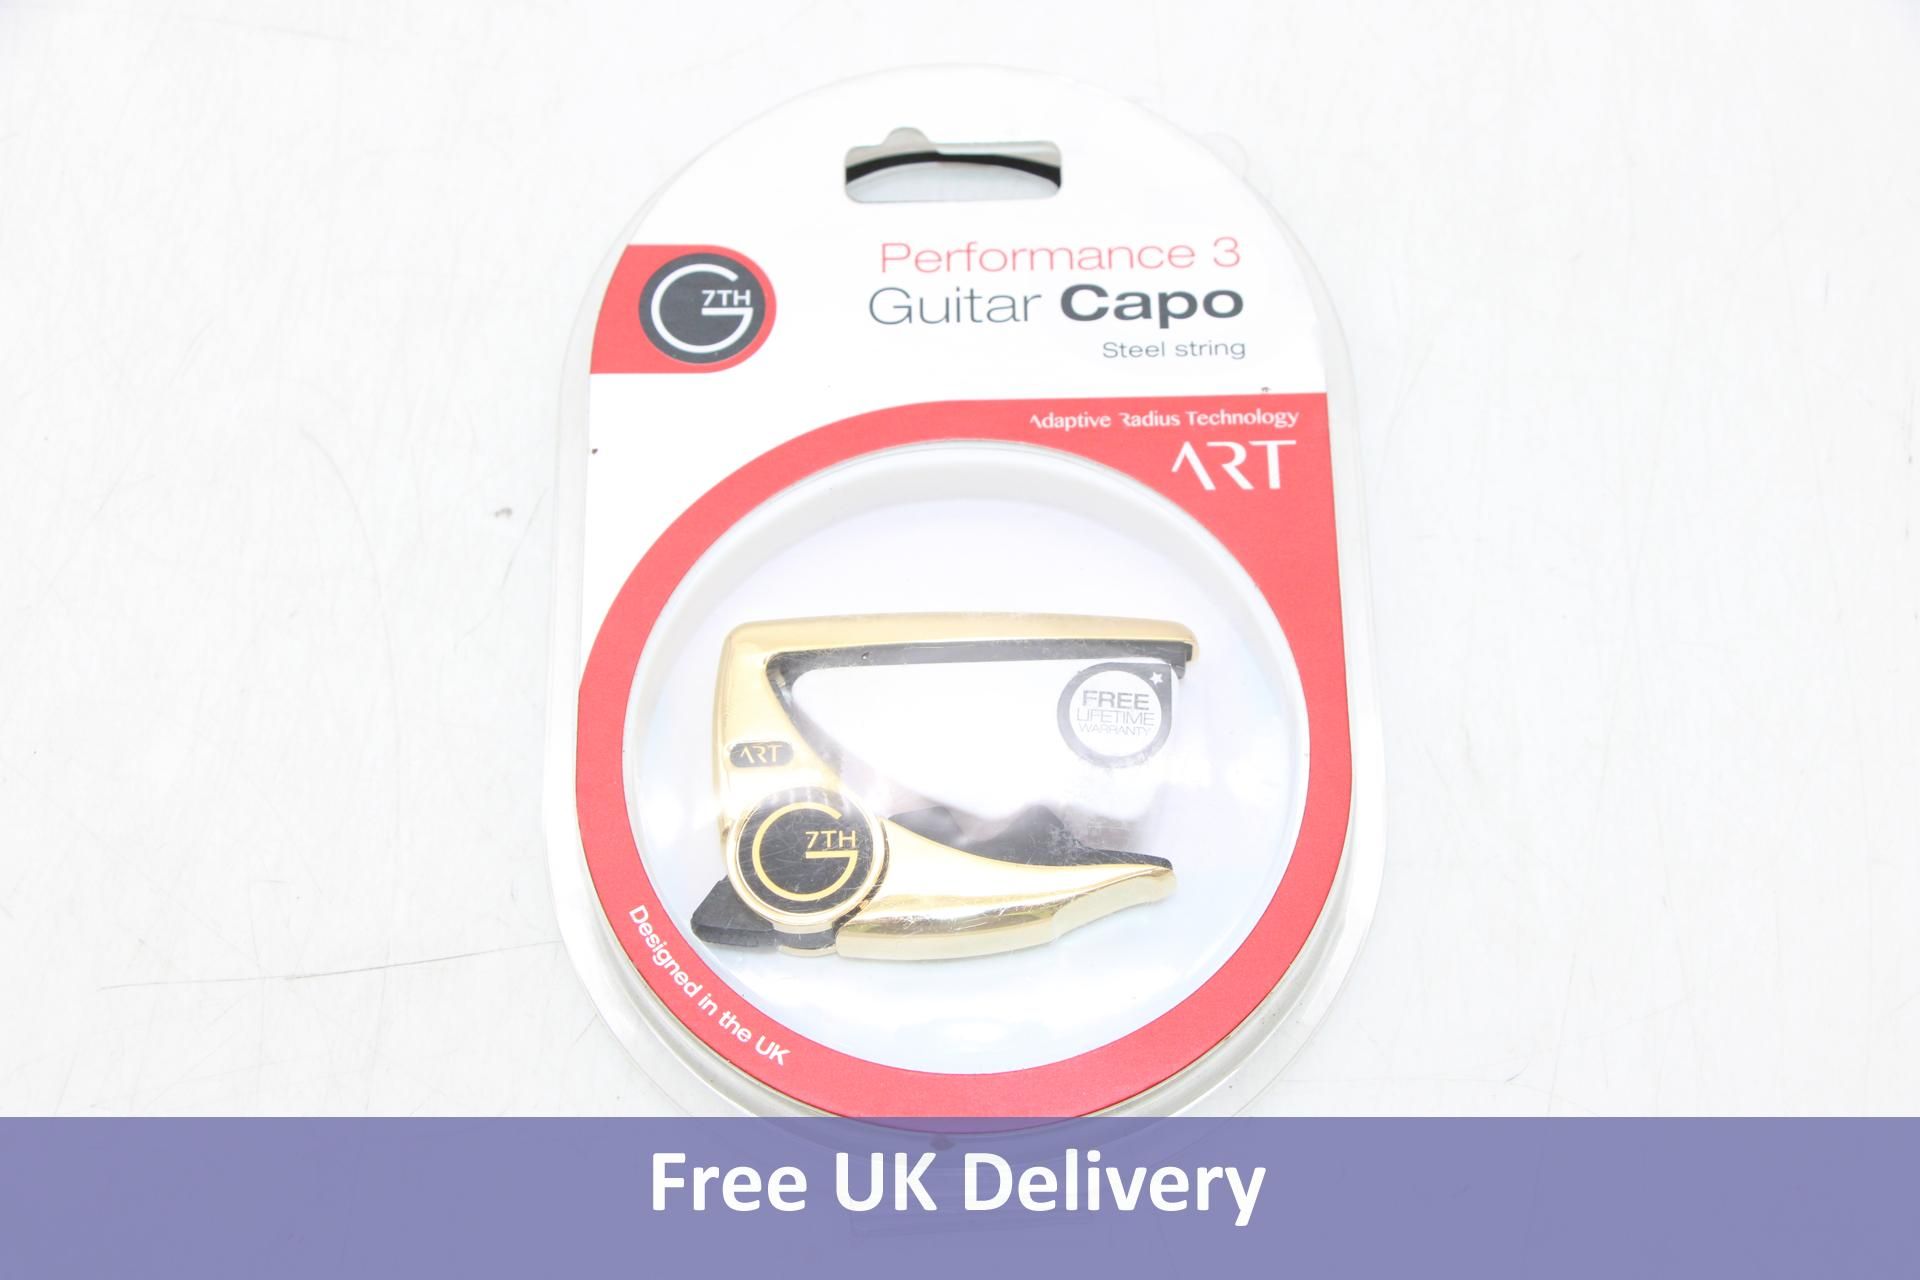 G7th Performance 3 Guitar Steel String Capo, 18k Gold Plated